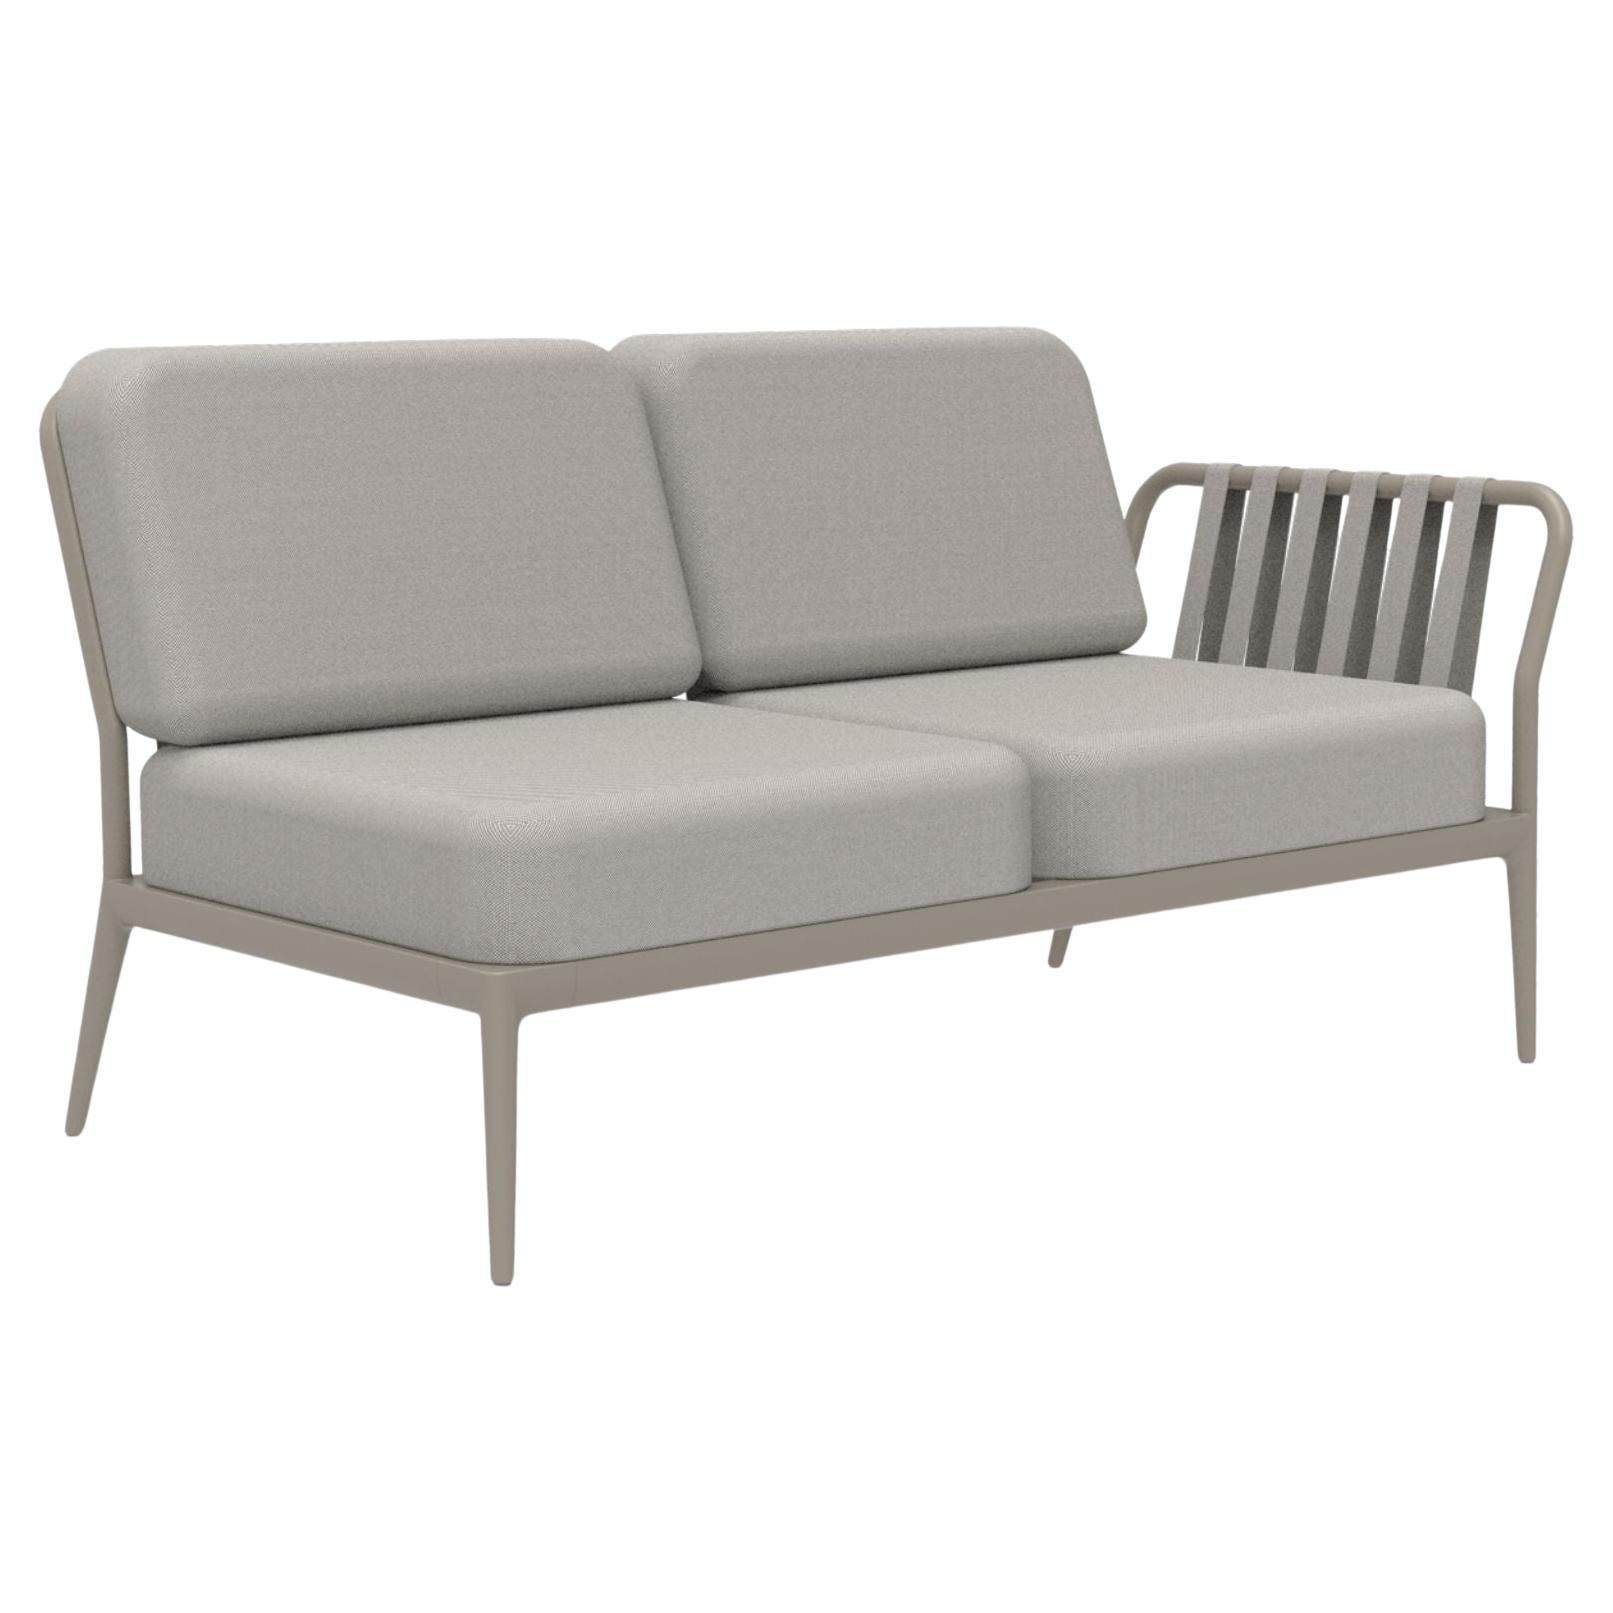 Ribbons Cream Double Left Modular Sofa by Mowee For Sale